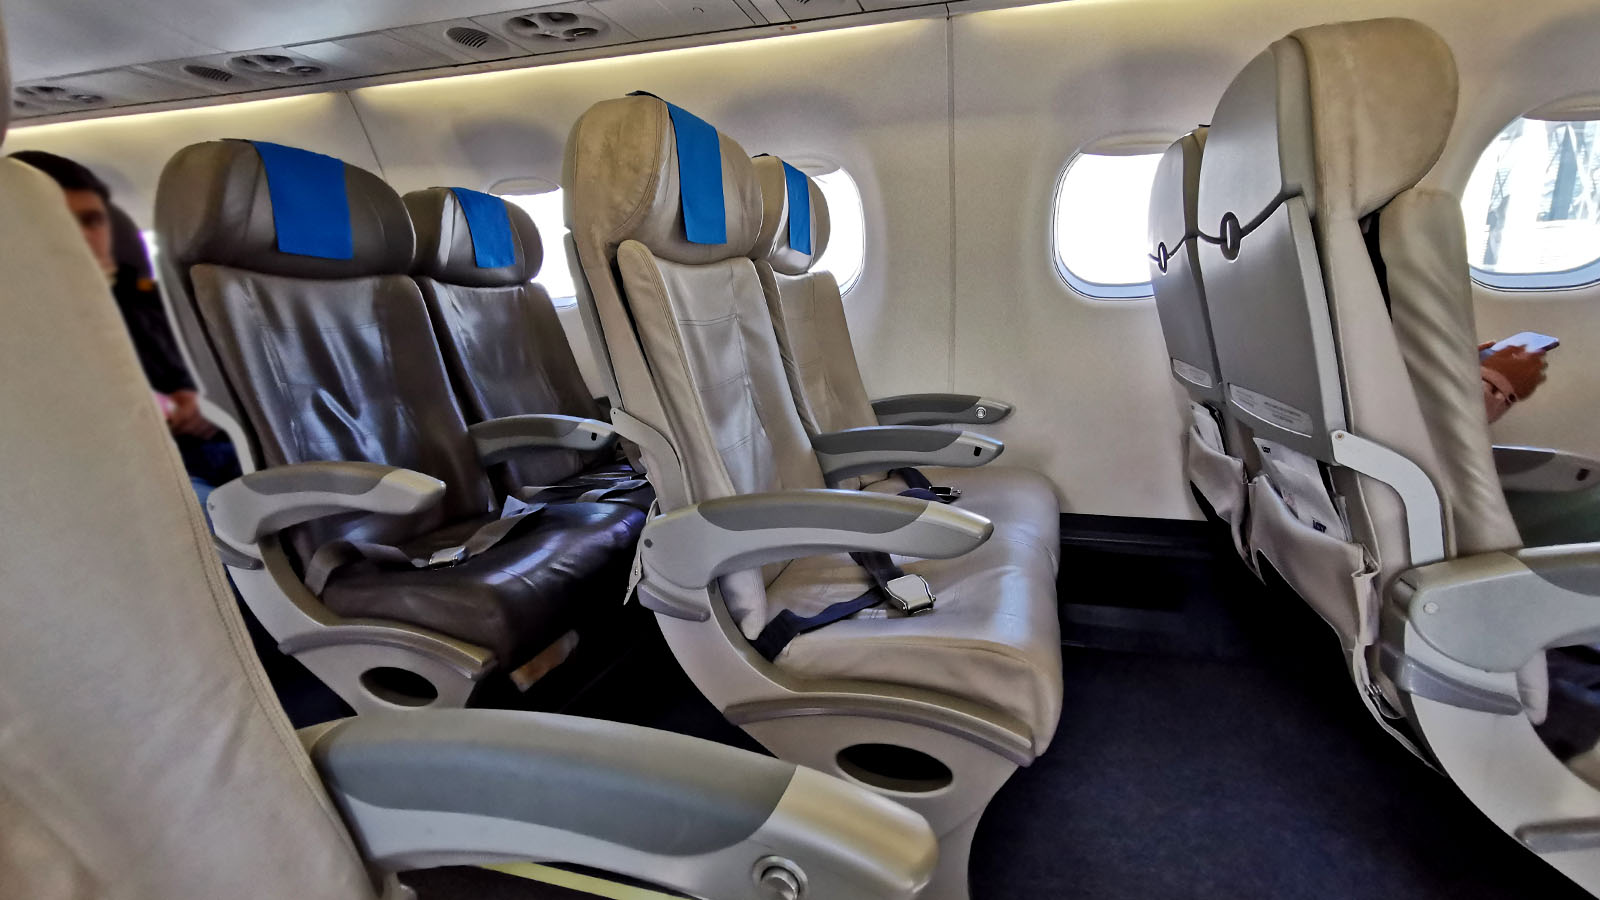 Cabin in LOT Polish Airlines Embraer E195 Economy Class